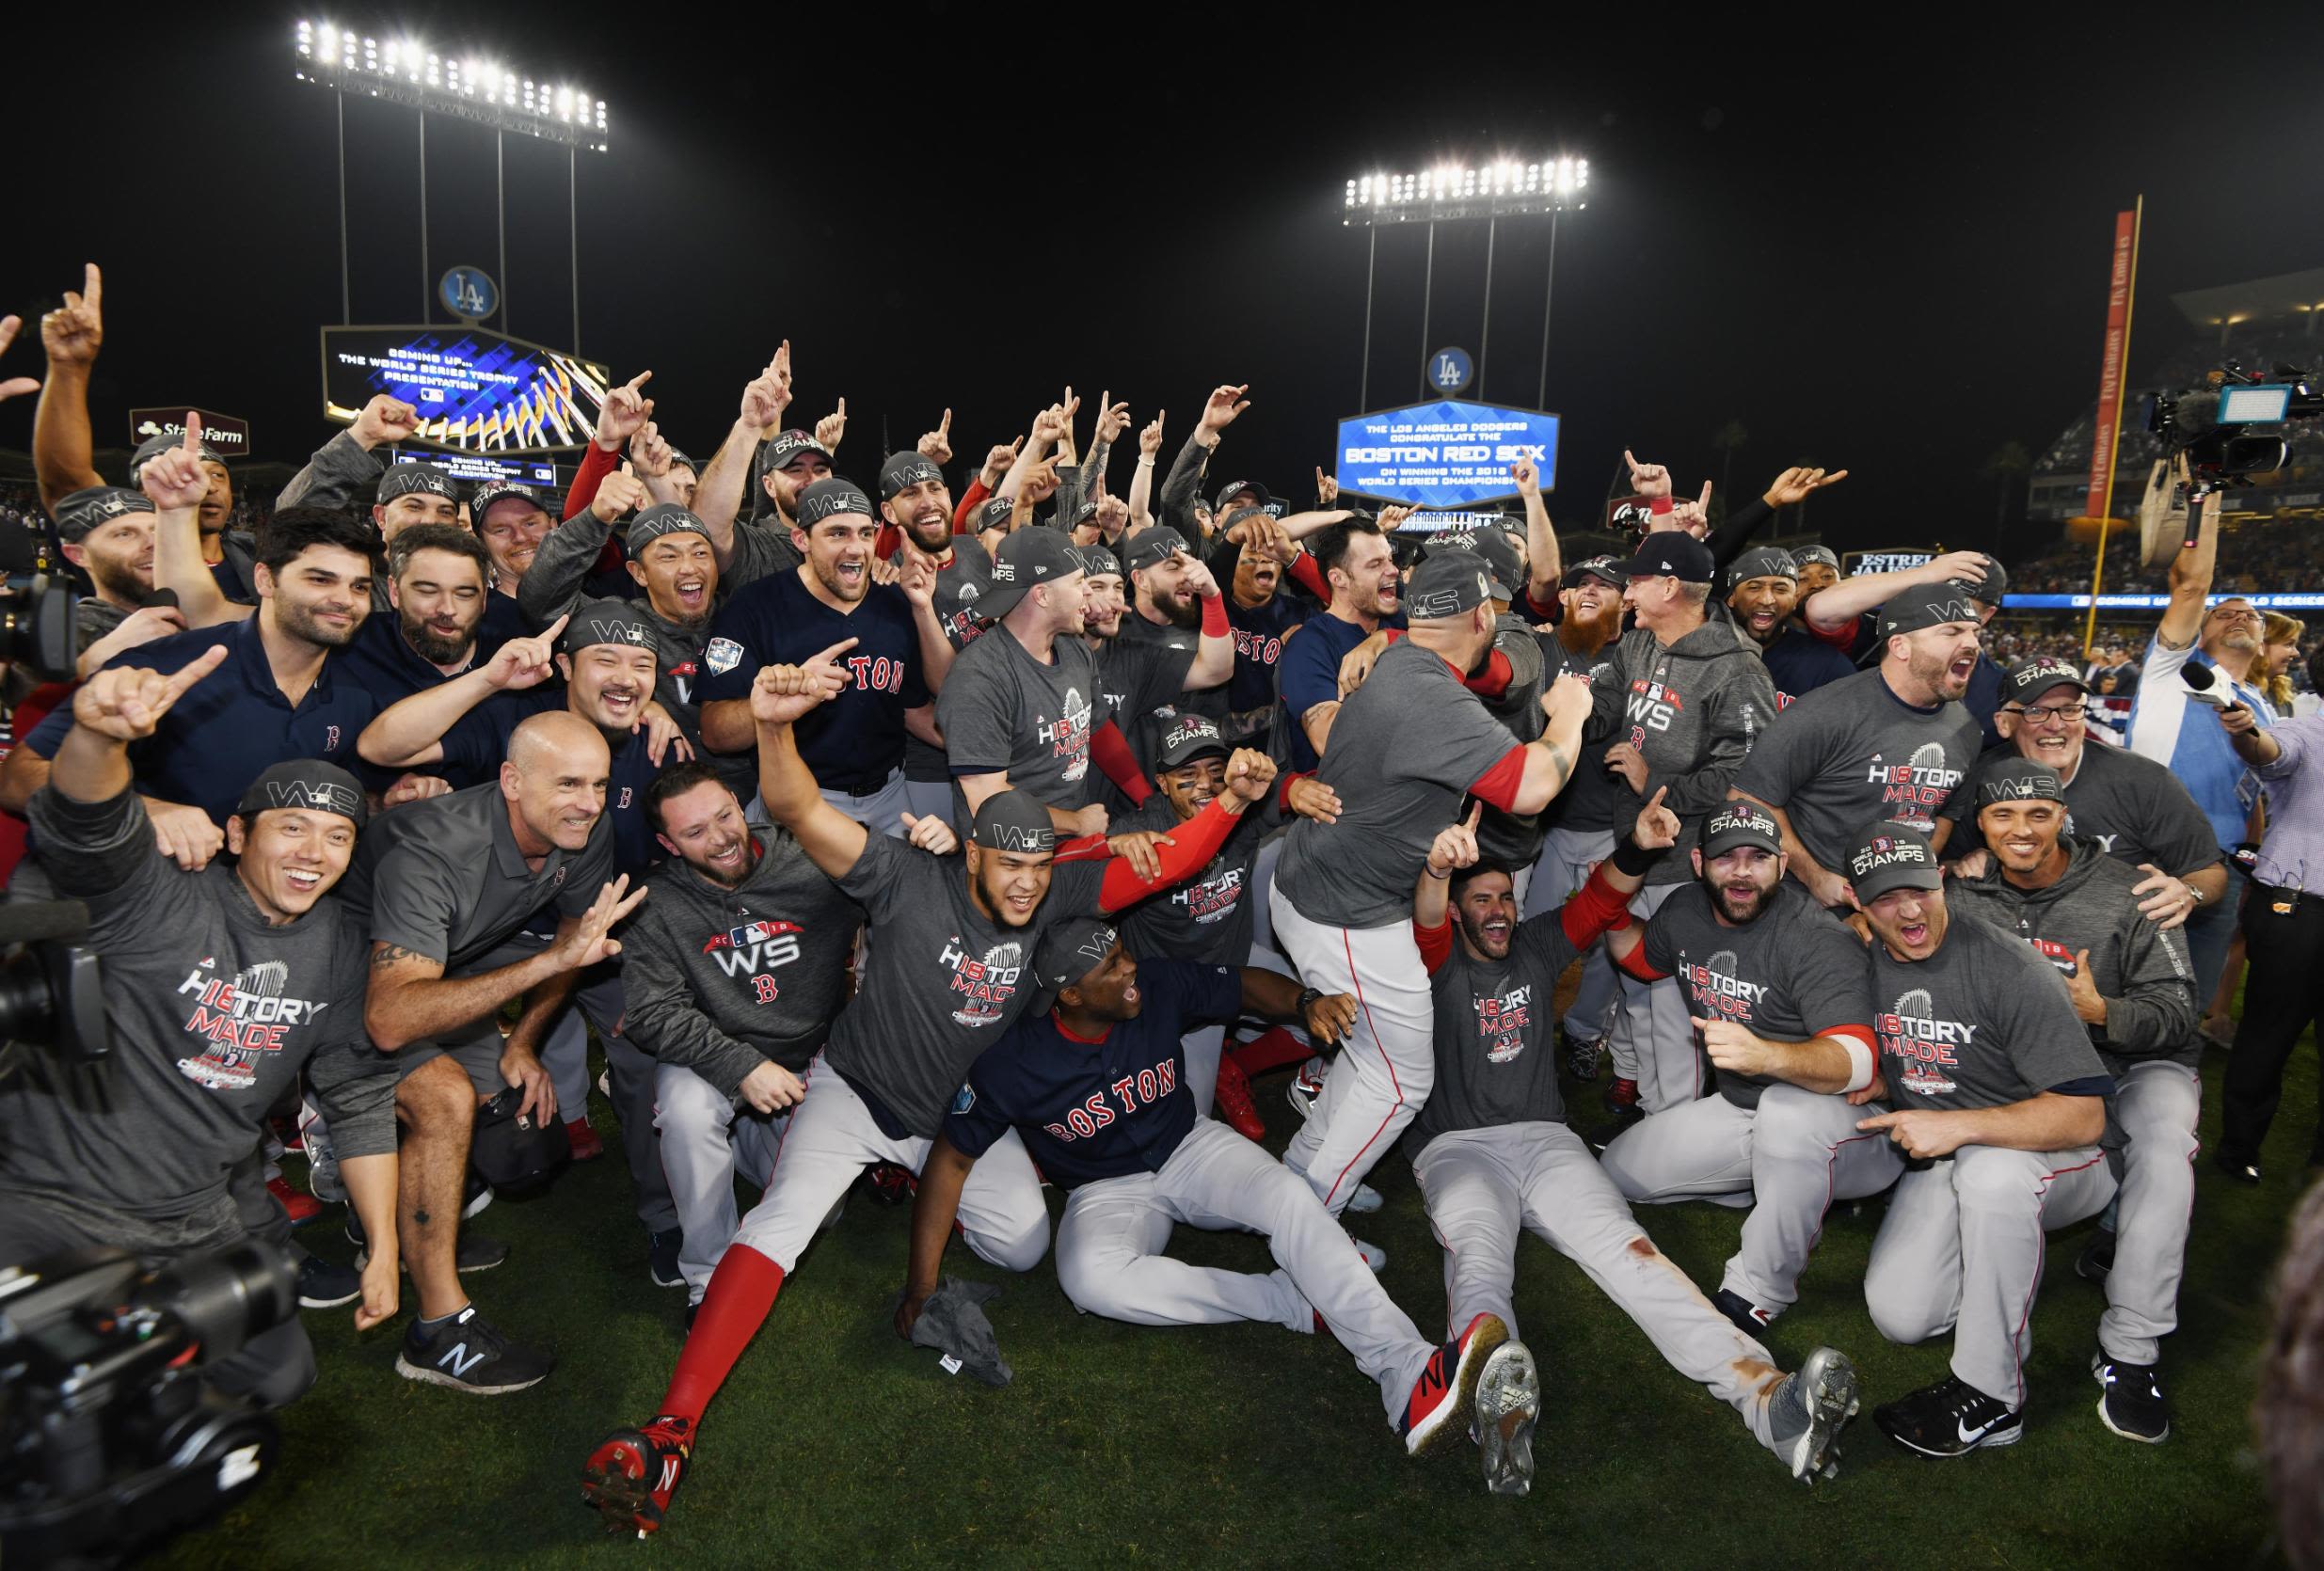 Red Sox 2018 World Series Rings Photos Archives - Billie Weiss